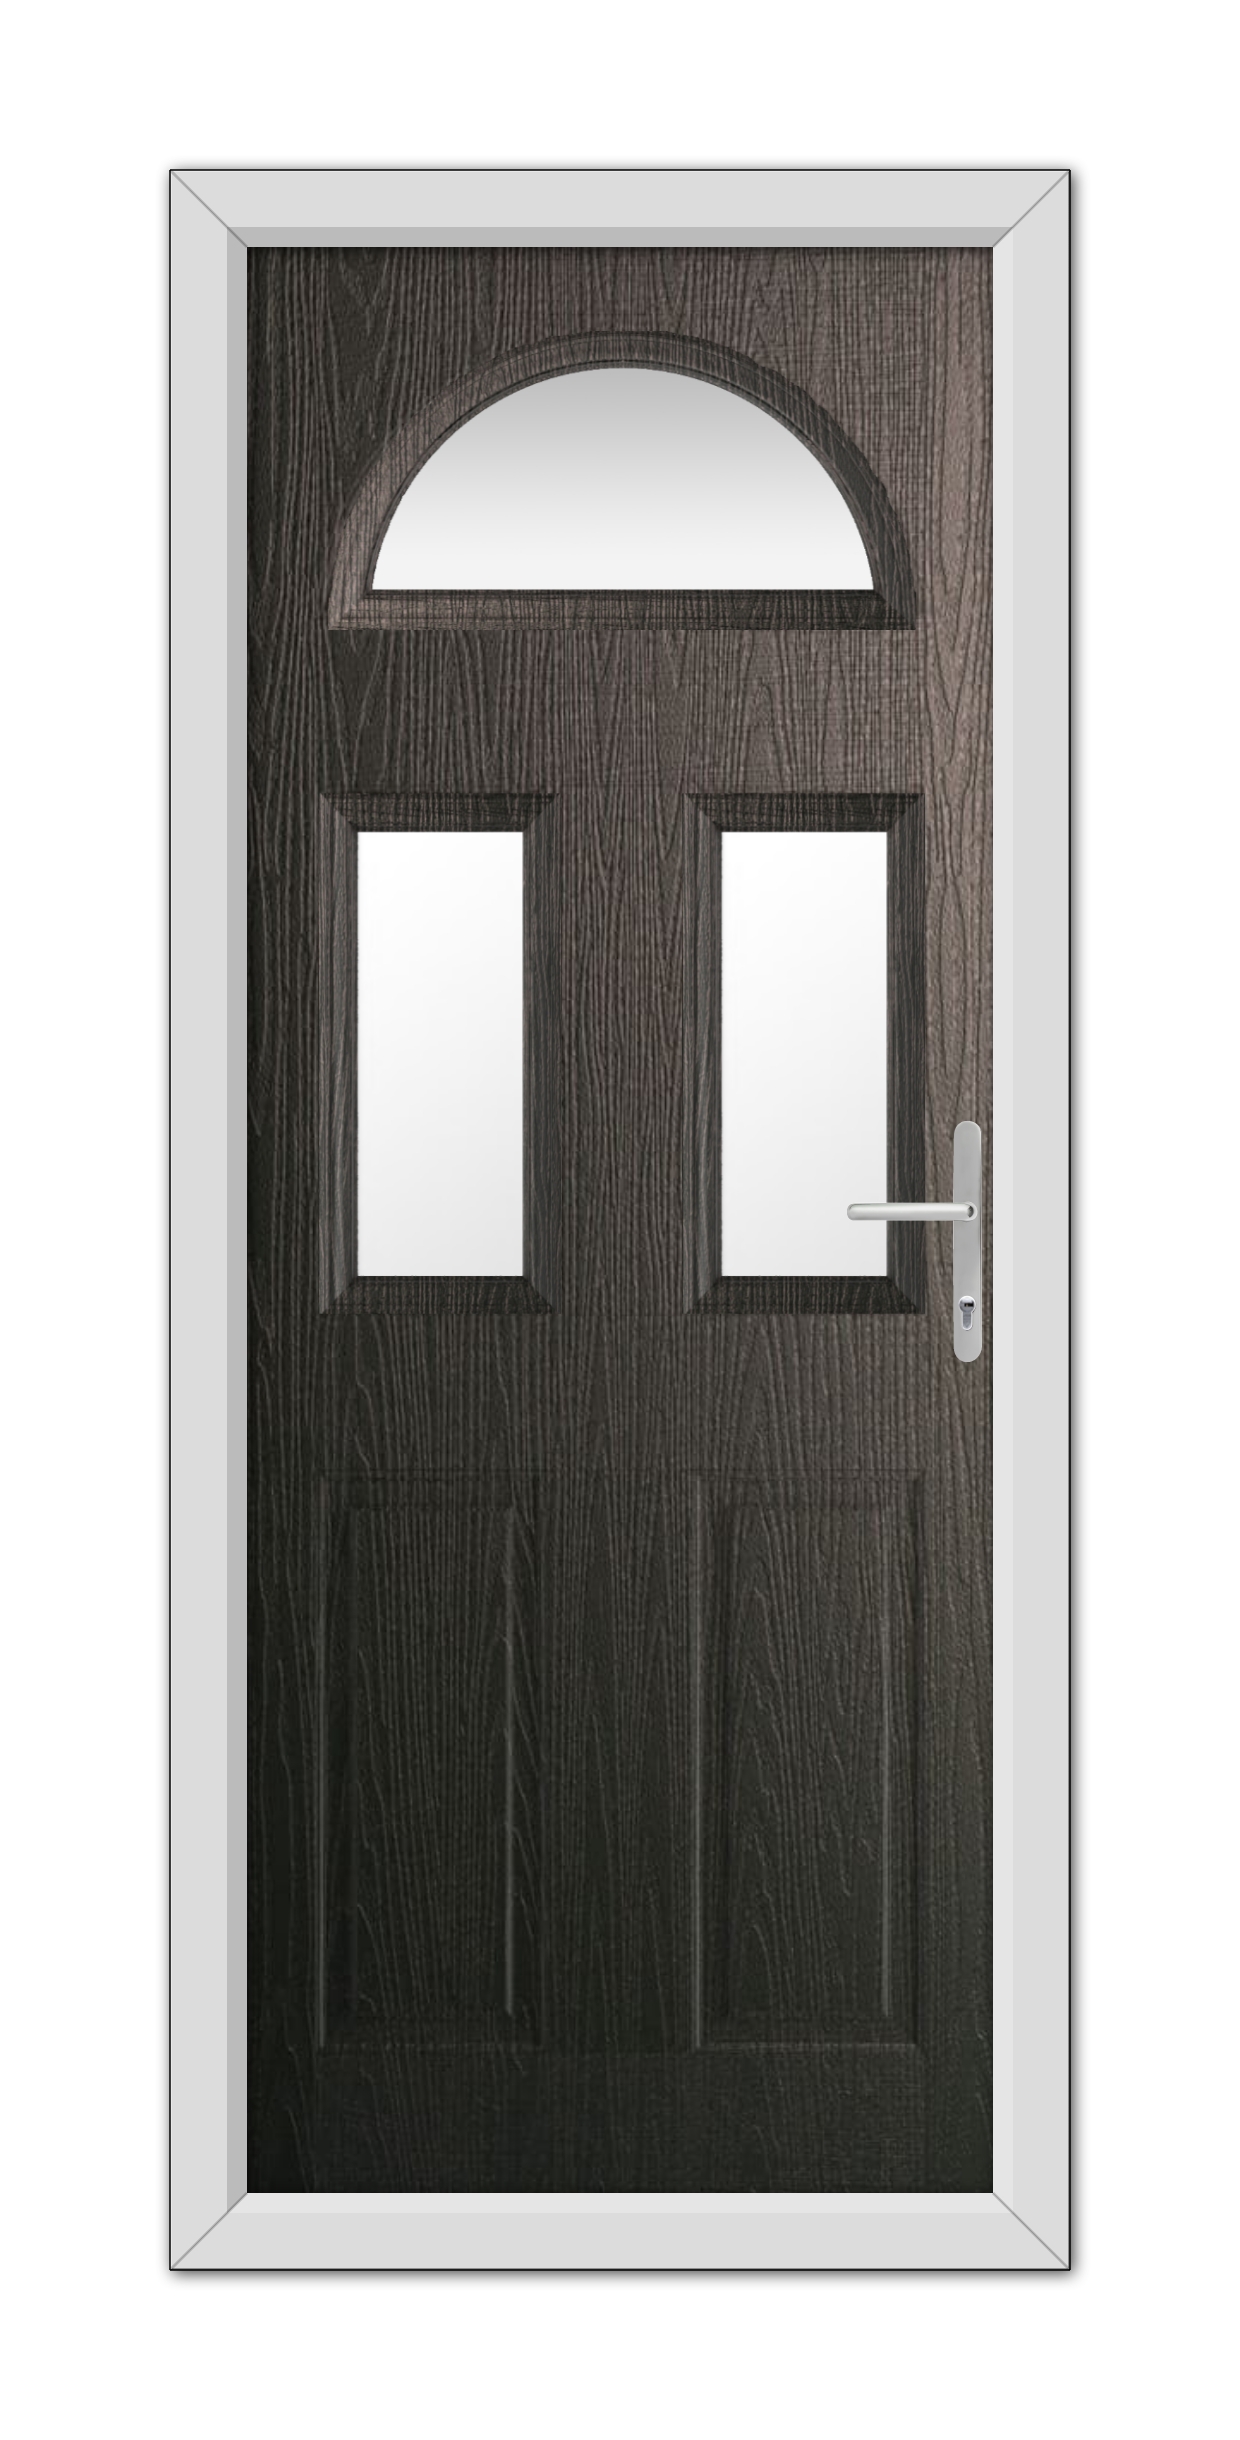 Schwarzbraun Winslow 3 Composite Door 48mm Timber Core with a white frame, featuring an arched top and two rectangular windows, complete with a modern handle on the right side.